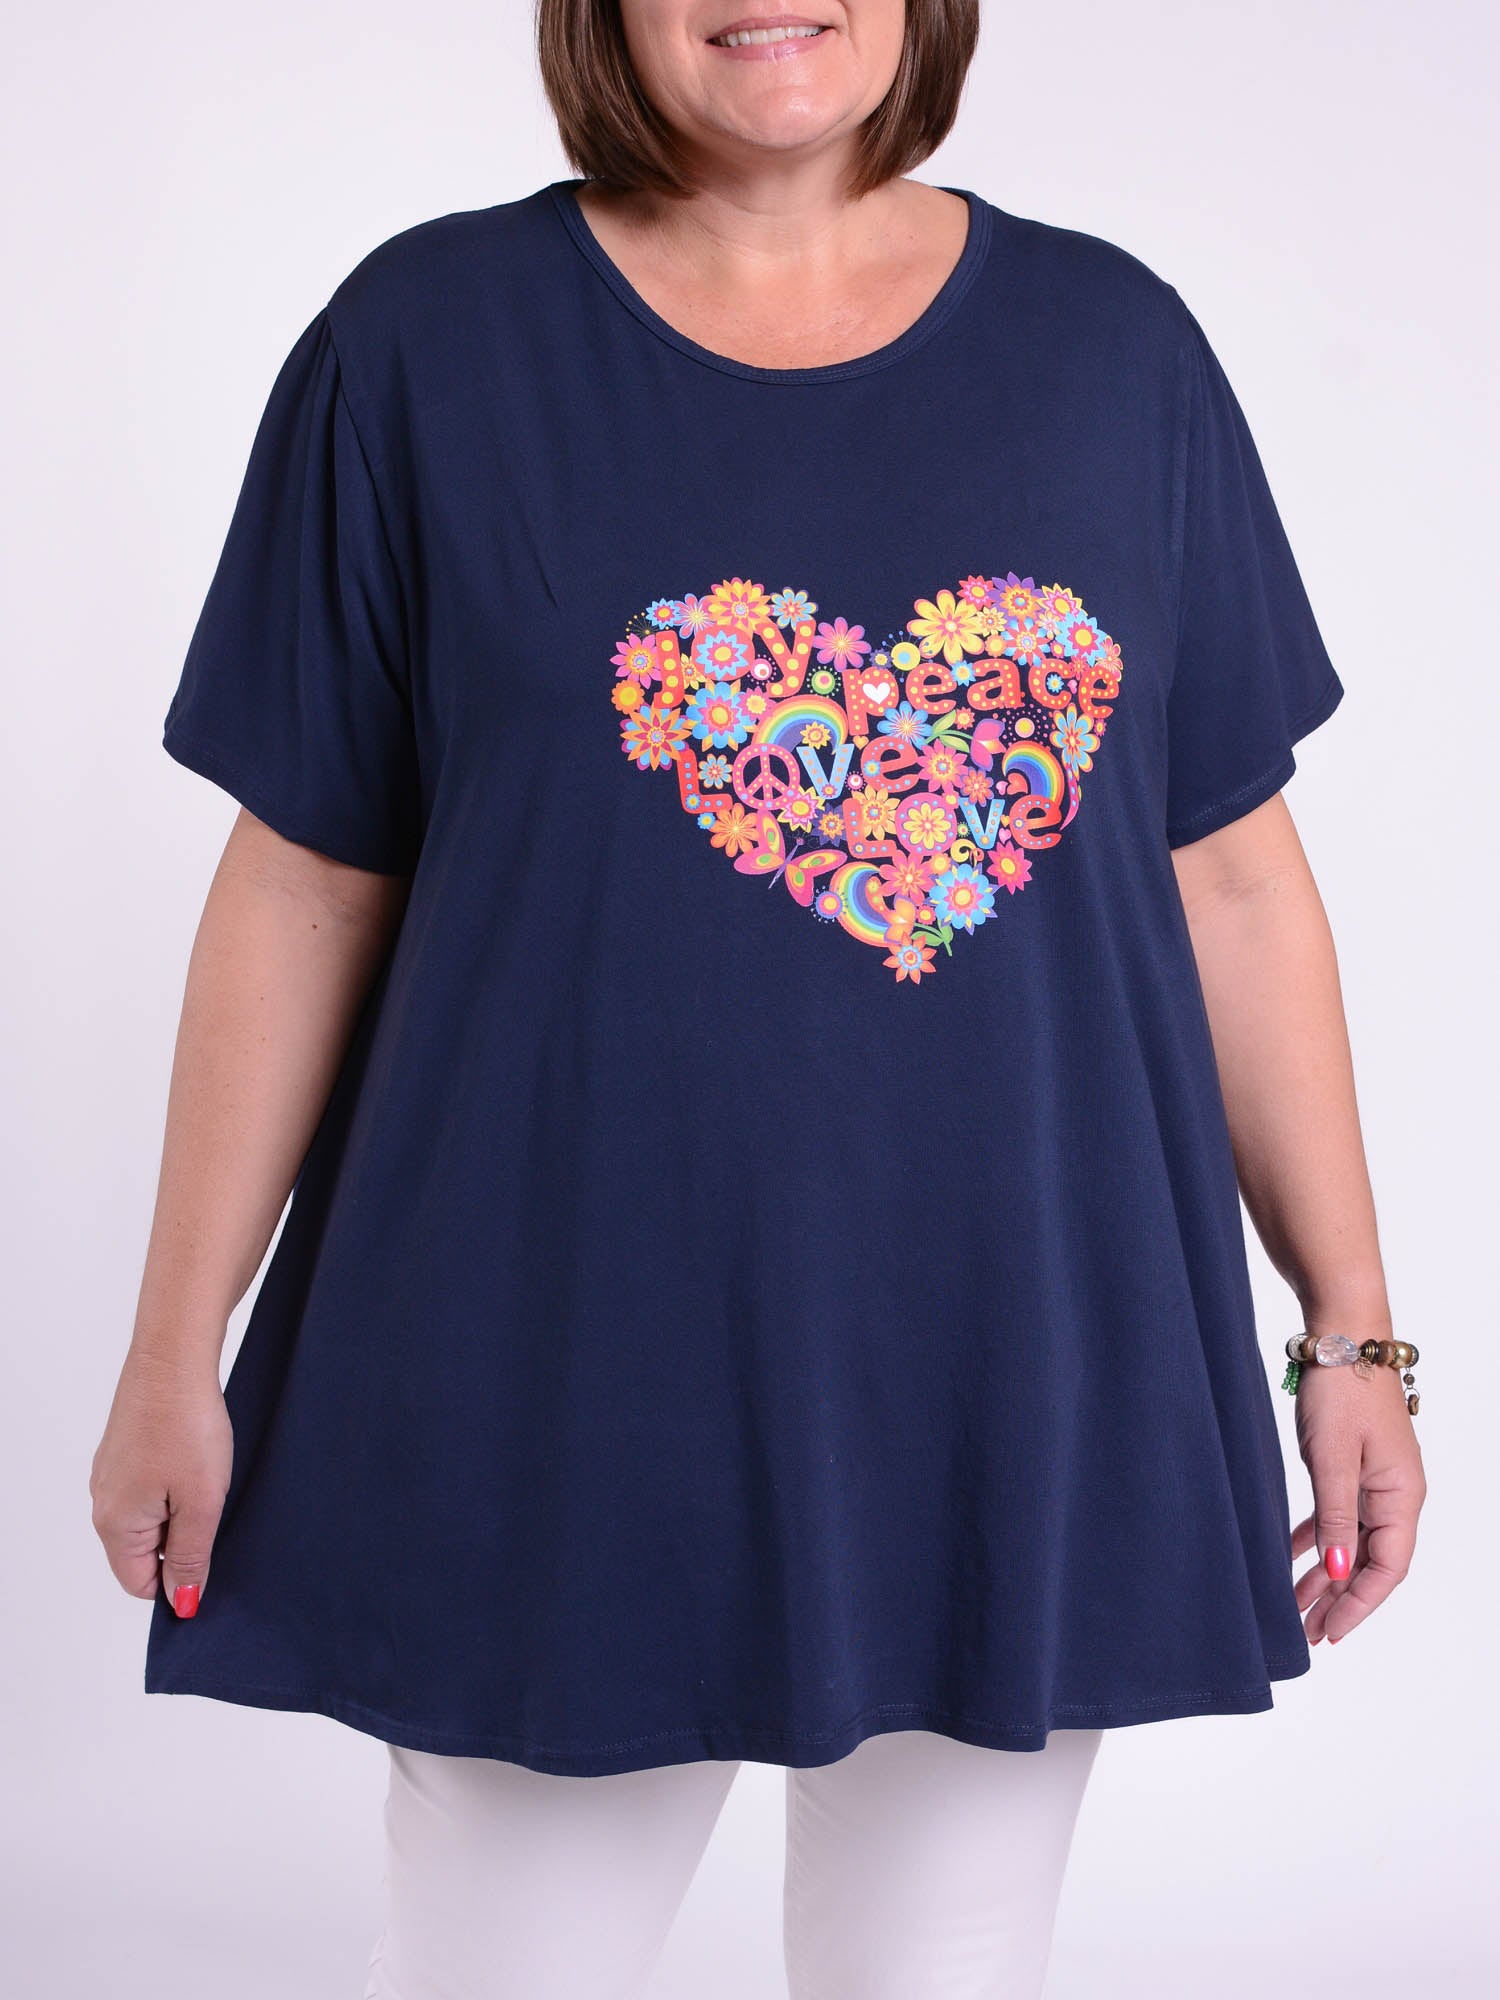 Basic Cotton Swing T Shirt - Round Neck 10516 PEACE AND LOVE, Tops & Shirts, Pure Plus Clothing, Lagenlook Clothing, Plus Size Fashion, Over 50 Fashion